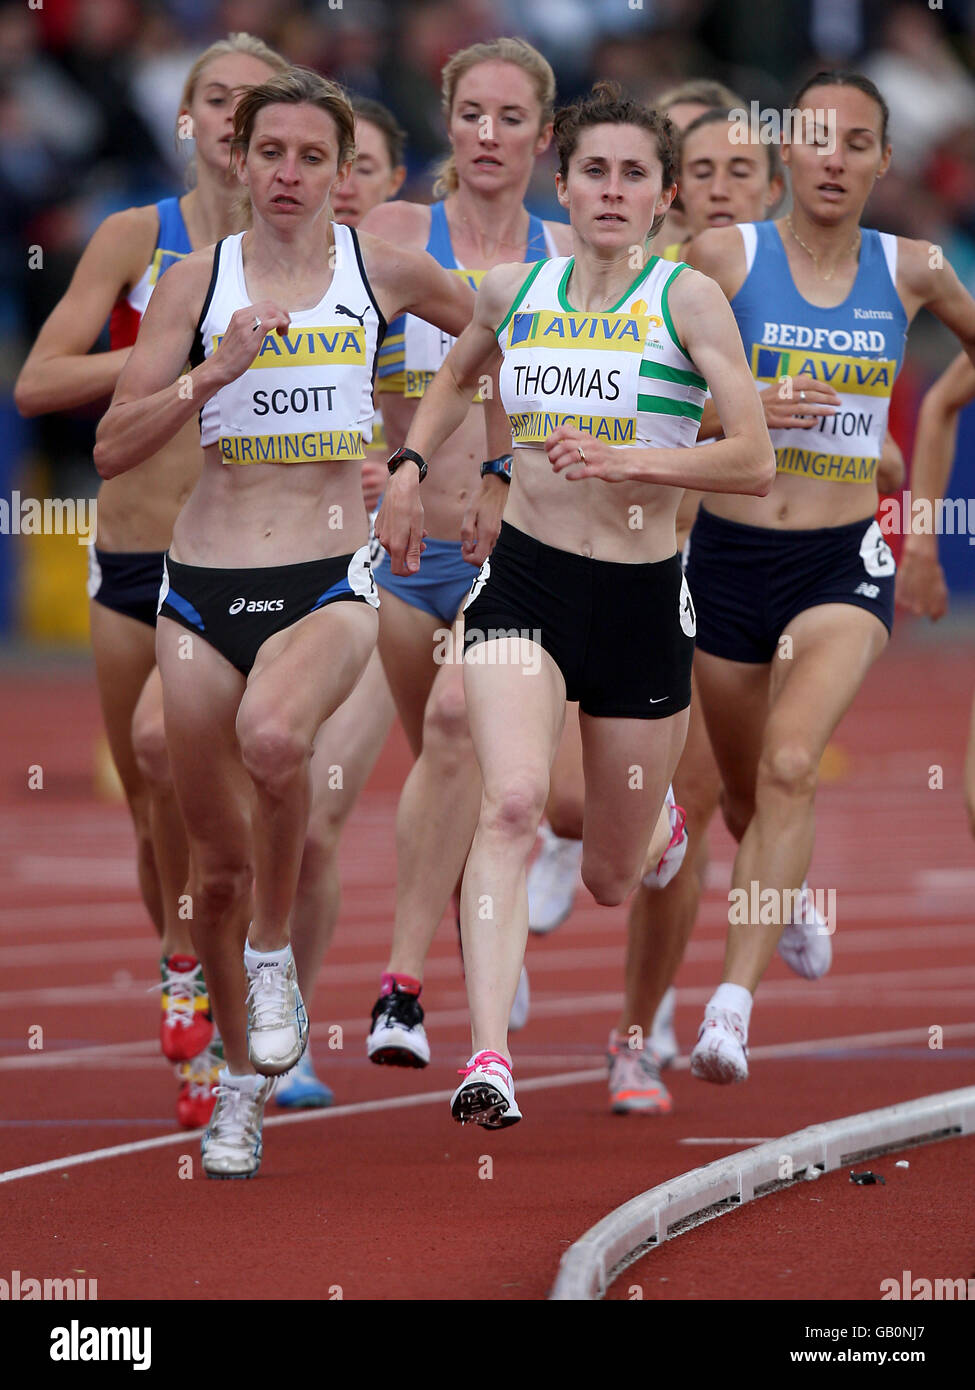 City of Glasgow's Susan Scott (l) and Wakefield Harriers' Charlene Thomas compete in the Women's 1500m Final during the Aviva National Championships, Alexander Stadium, Birmingham Stock Photo